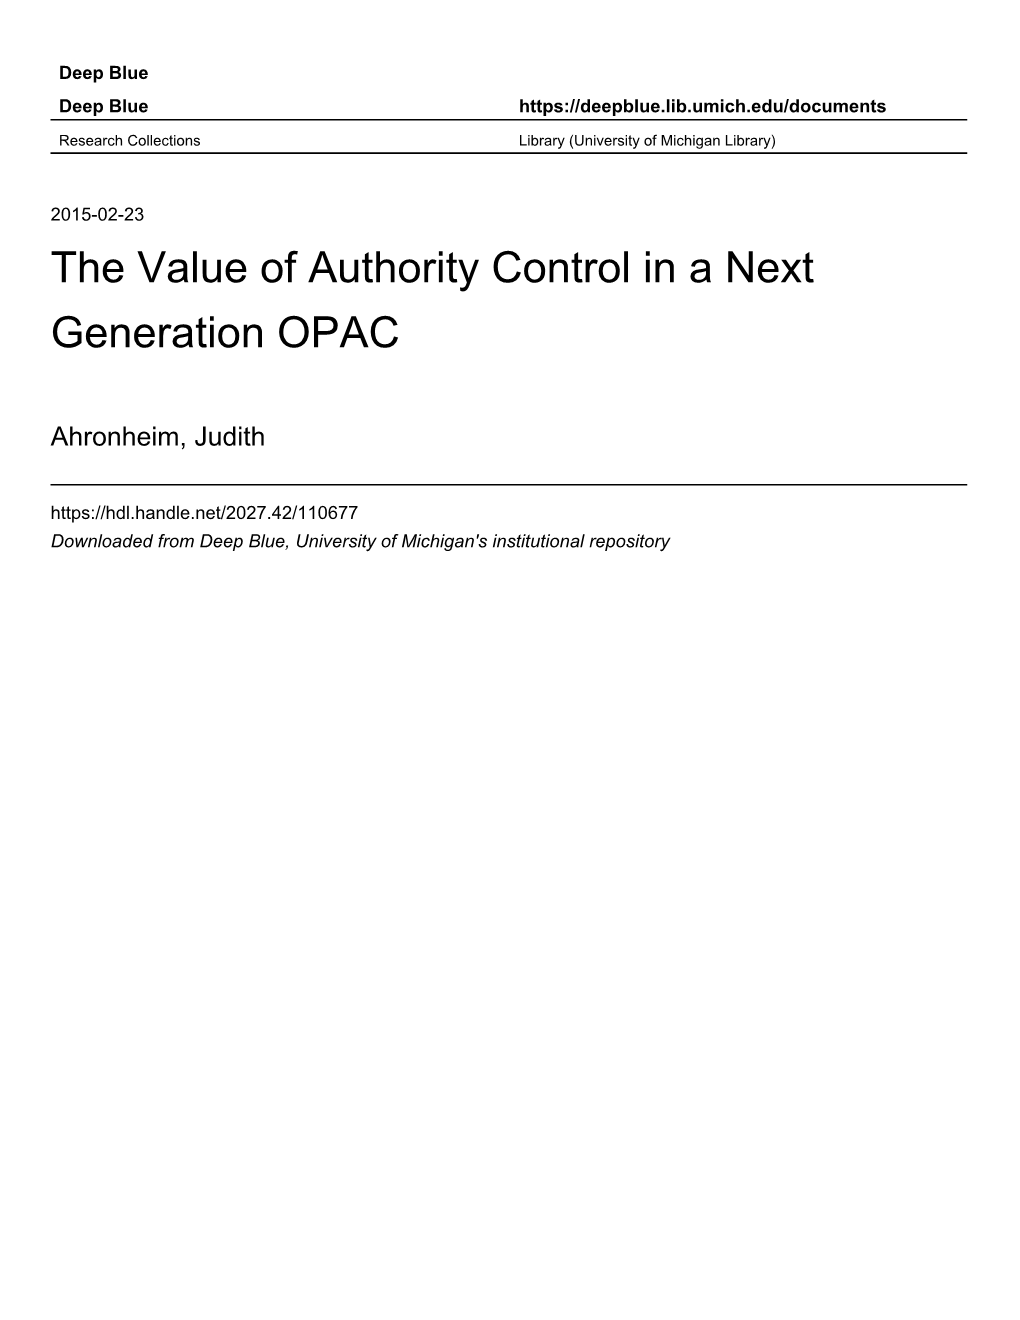 The Value of Authority Control in a Next Generation OPAC